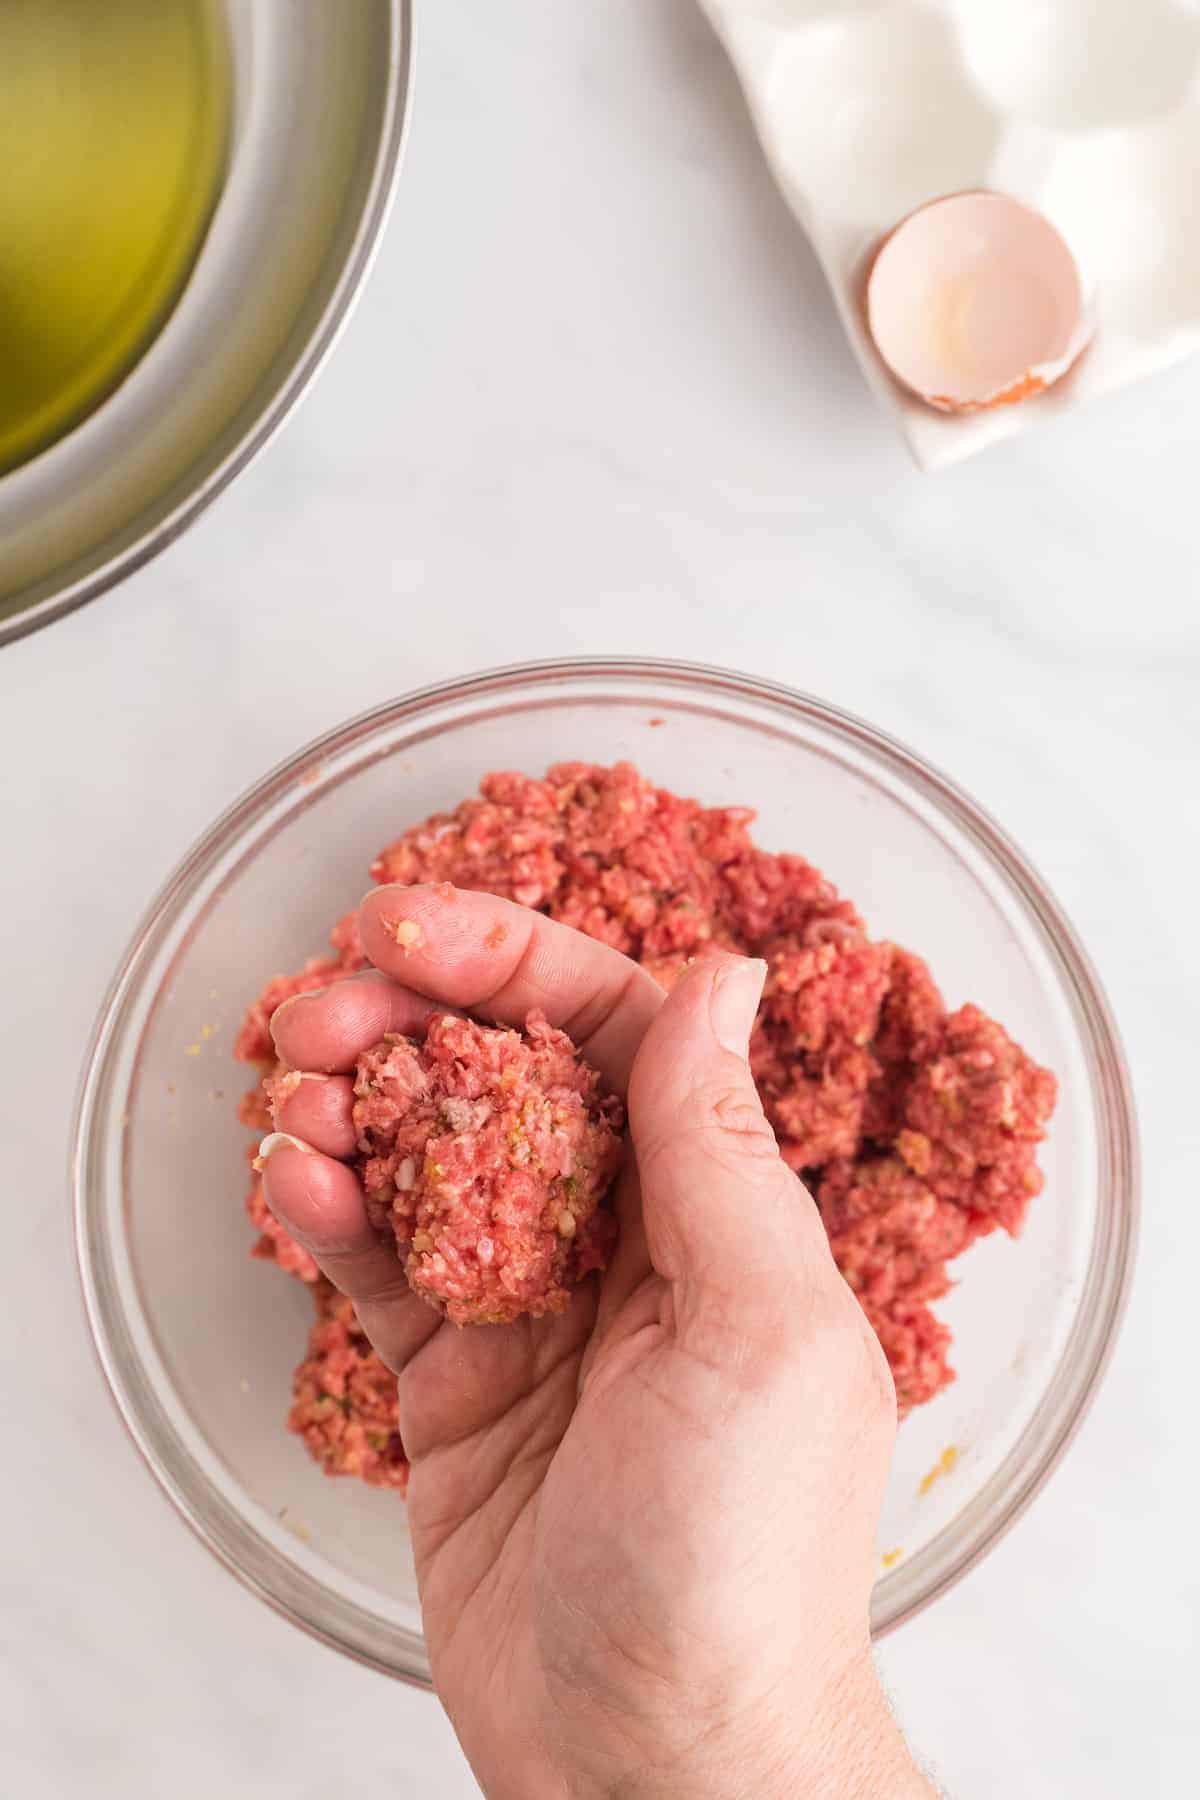 forming the meatballs in hand